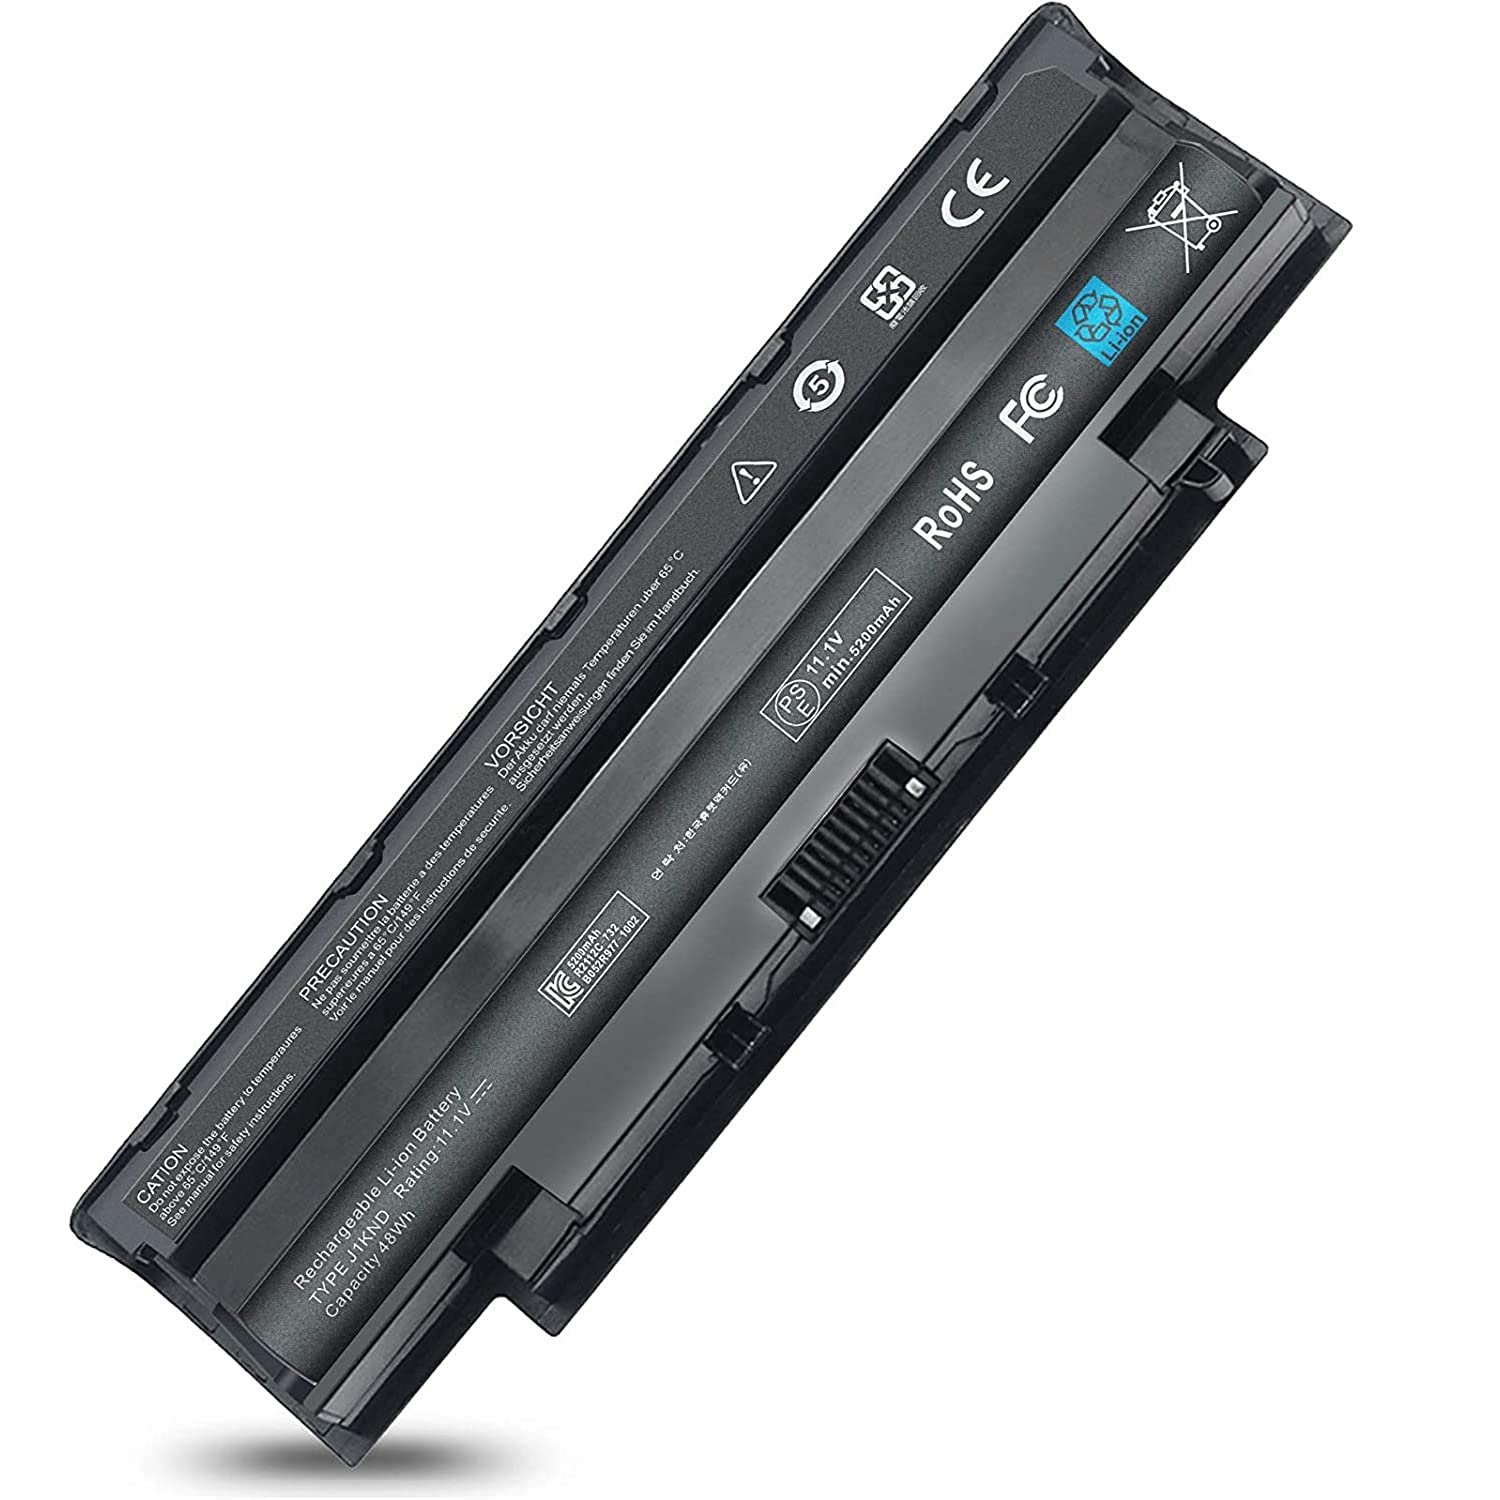 J1Knd Laptop Battery 11.1V 48Wh Compatible With Dell Inspiron N5110 M5040 N5010 N7010 N4110 N7110